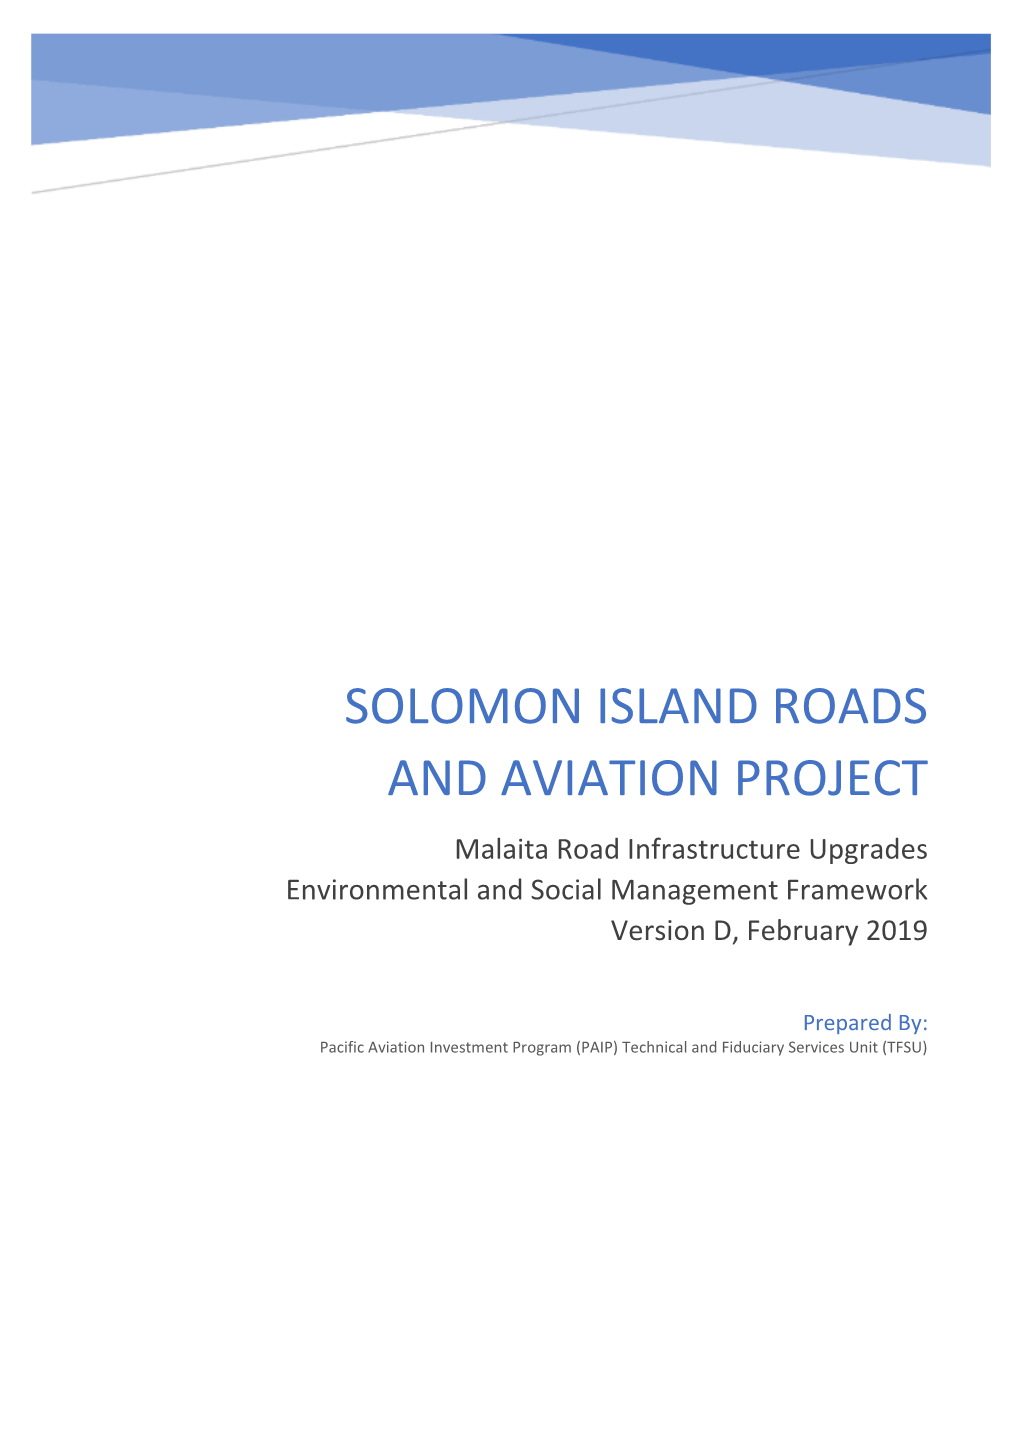 SOLOMON ISLAND ROADS and AVIATION PROJECT Malaita Road Infrastructure Upgrades Environmental and Social Management Framework Version D, February 2019